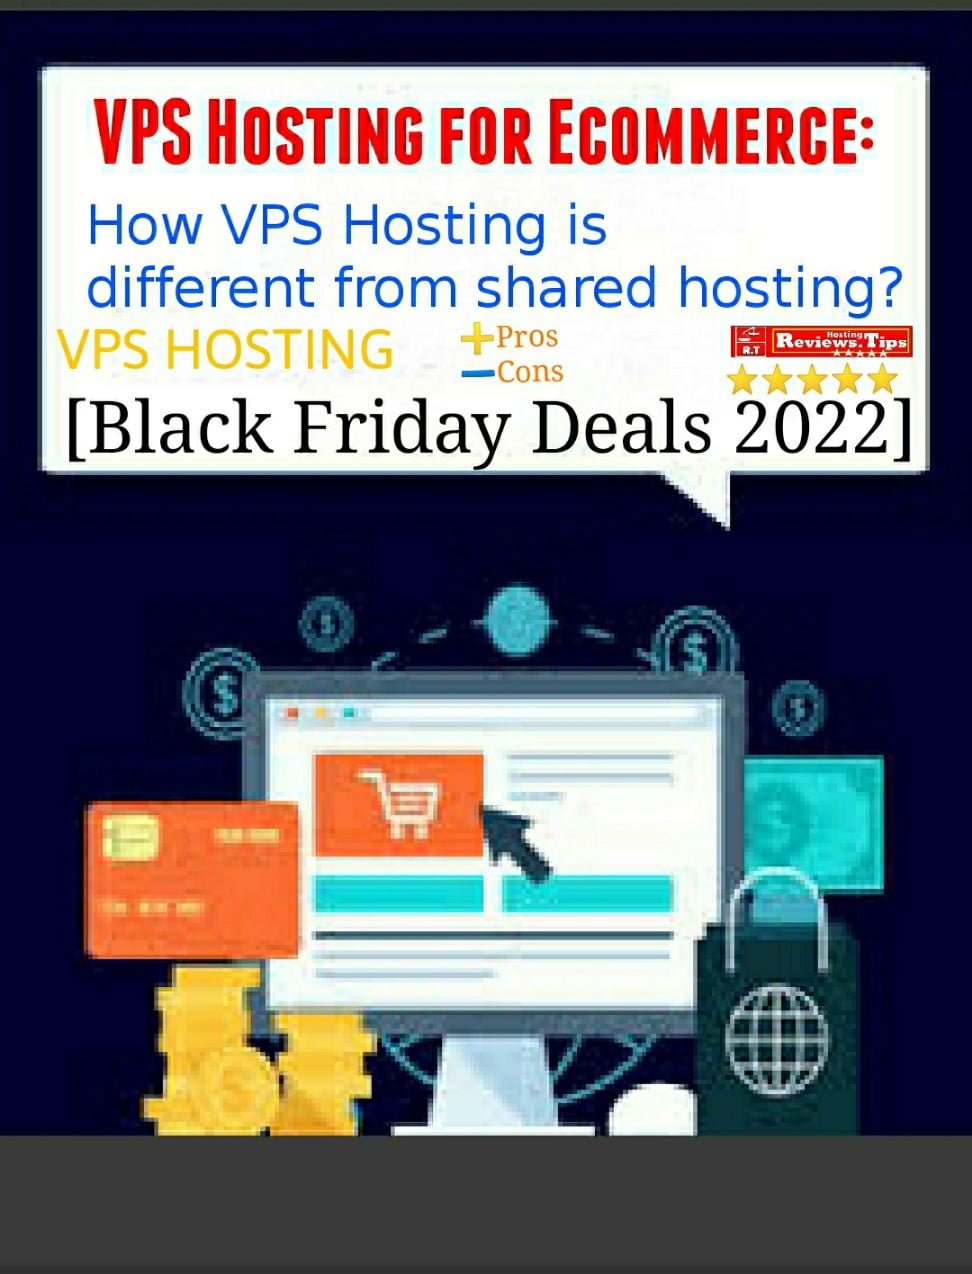 VPS Hosting for Ecommerce How VPS Hosting is different from shared hosting Black Friday Deals 2022